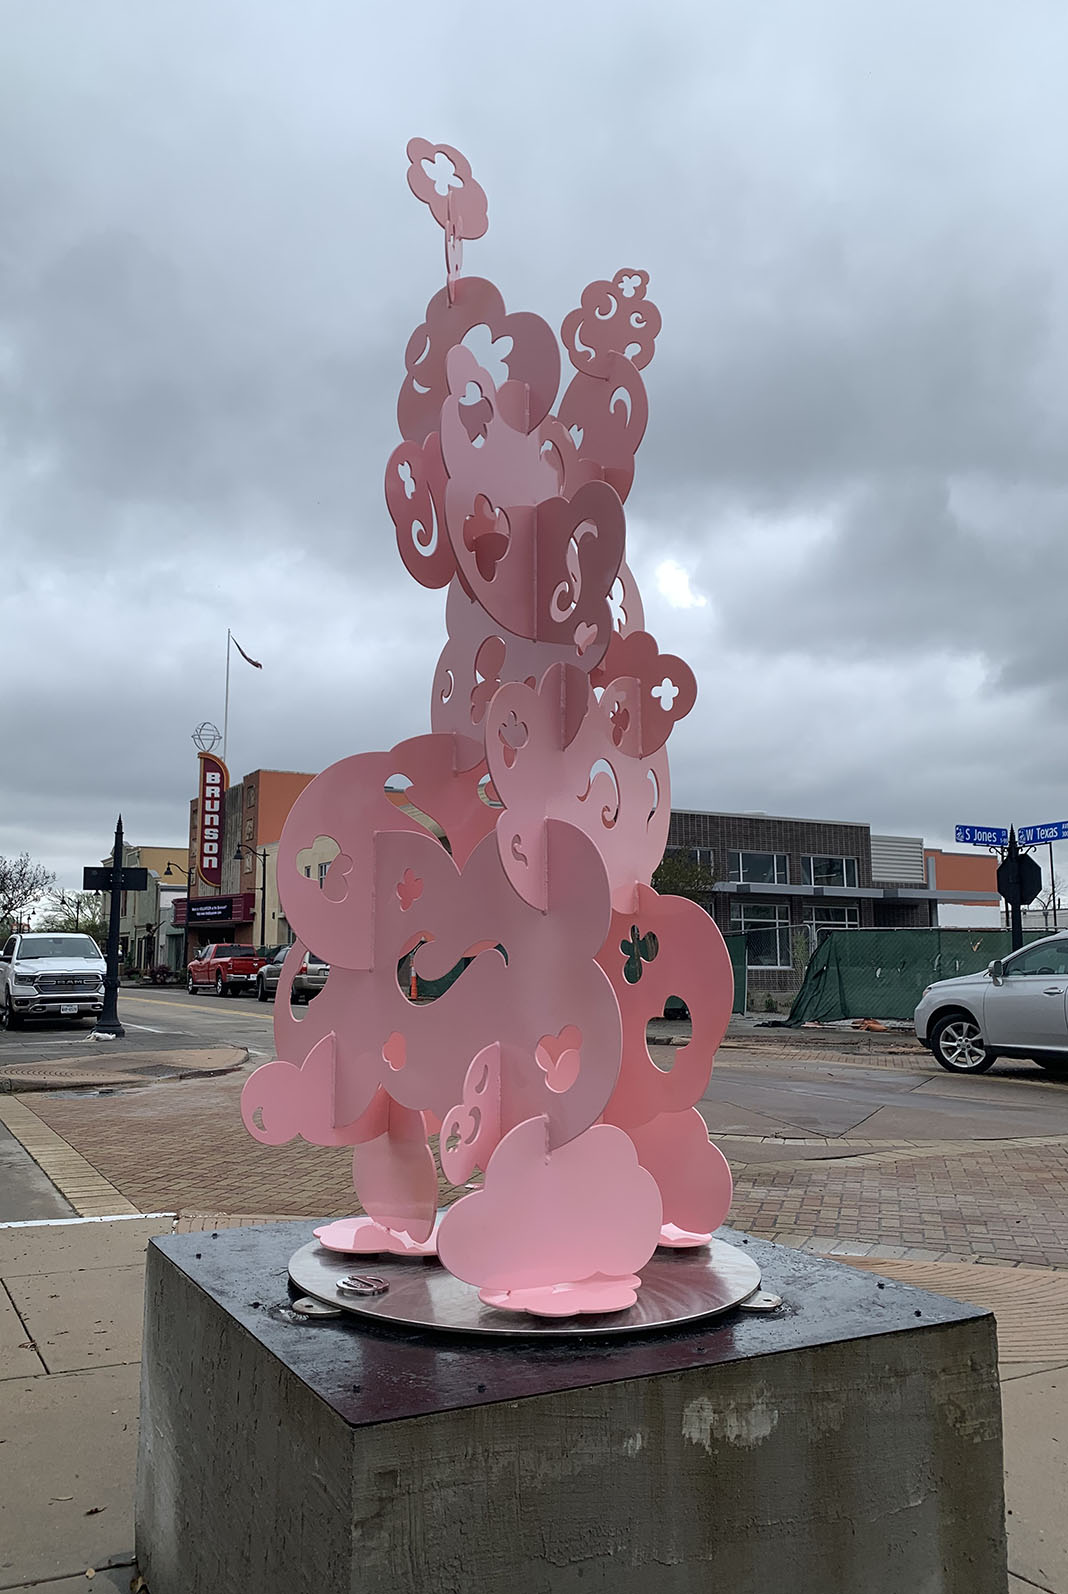 A pink sculpture with many loops and designs on a cloudy gray day